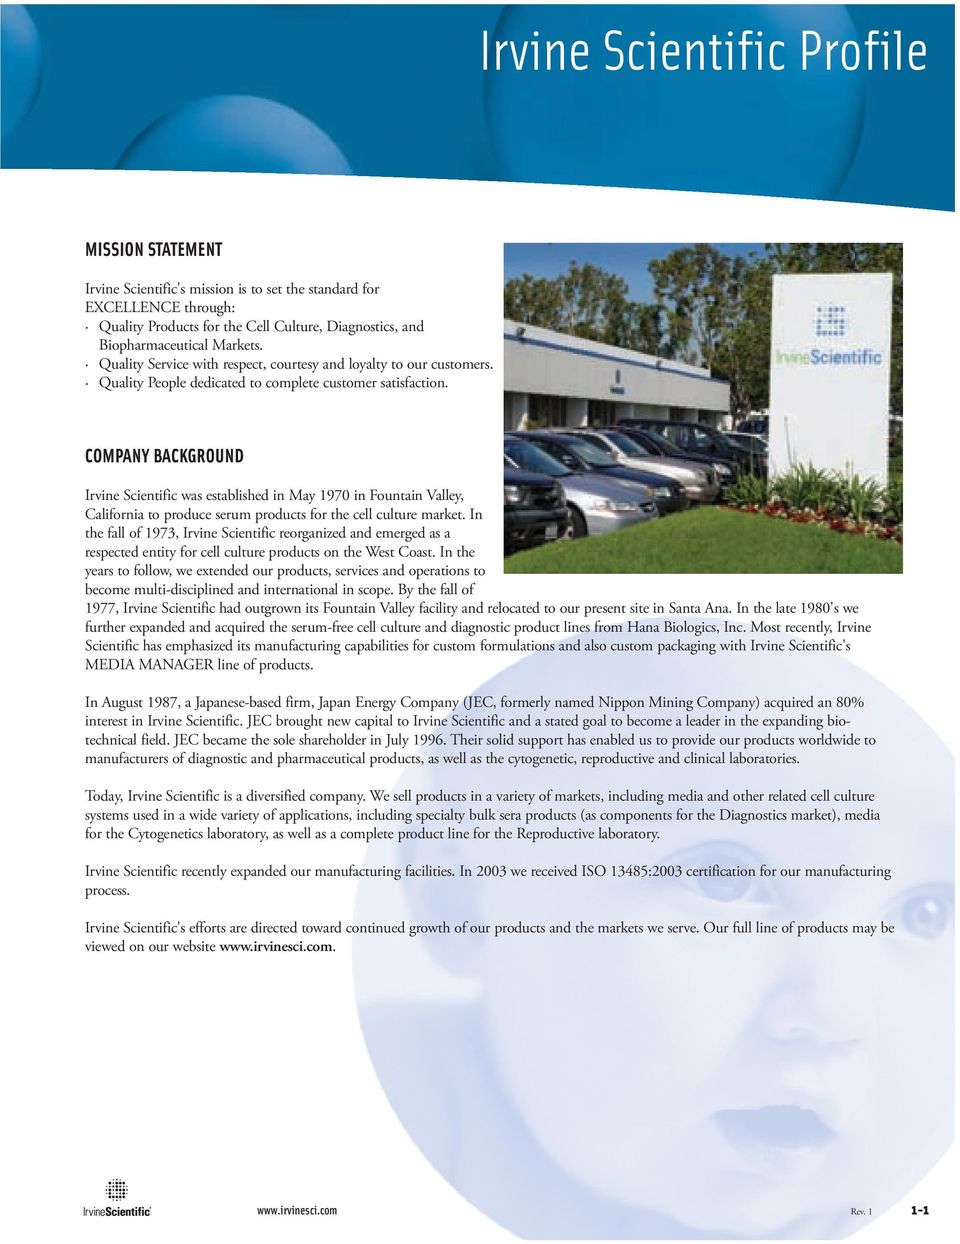 COMPANY BACKGROUND Irvine Scientific was established in May 1970 in Fountain Valley, California to produce serum products for the cell culture market.